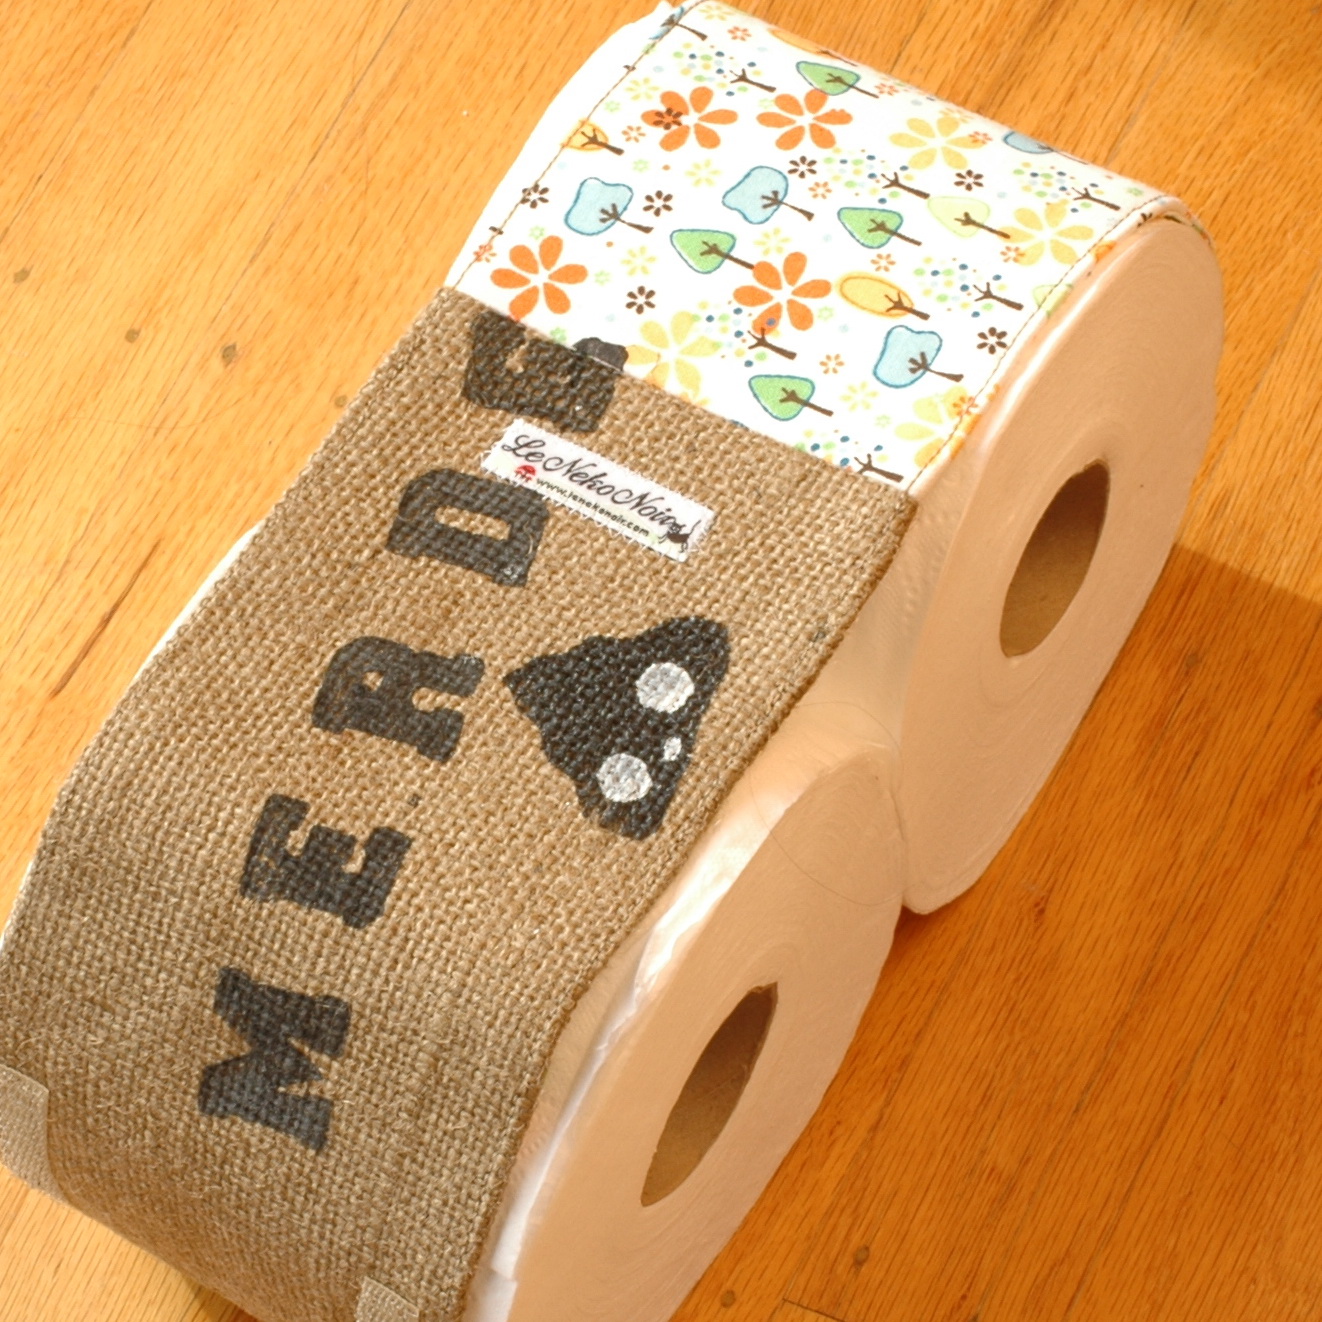 a couple of rolls of toilet paper on top of a wooden floor